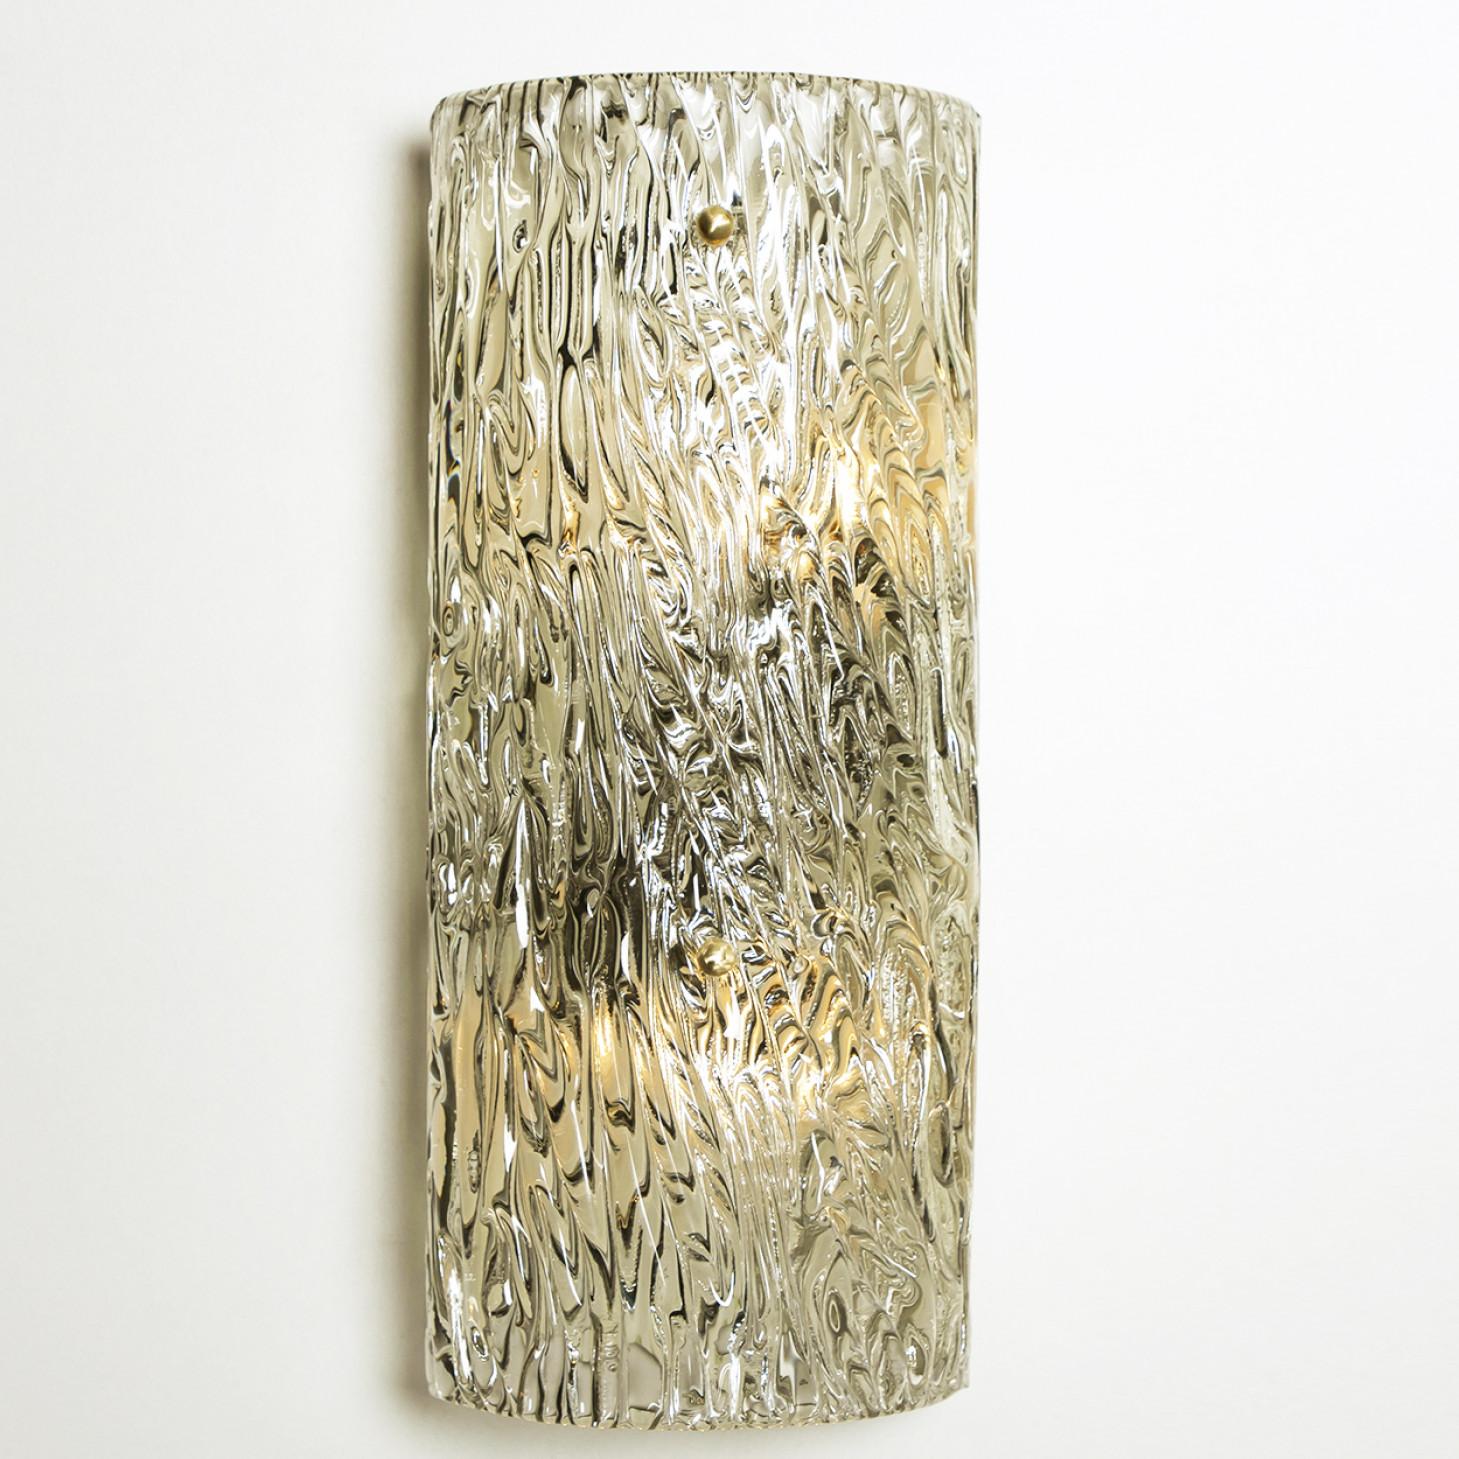 One of Four Large Modern Brass Ice Glass Wall Lights by J. T. Kalmar, 1960s For Sale 3